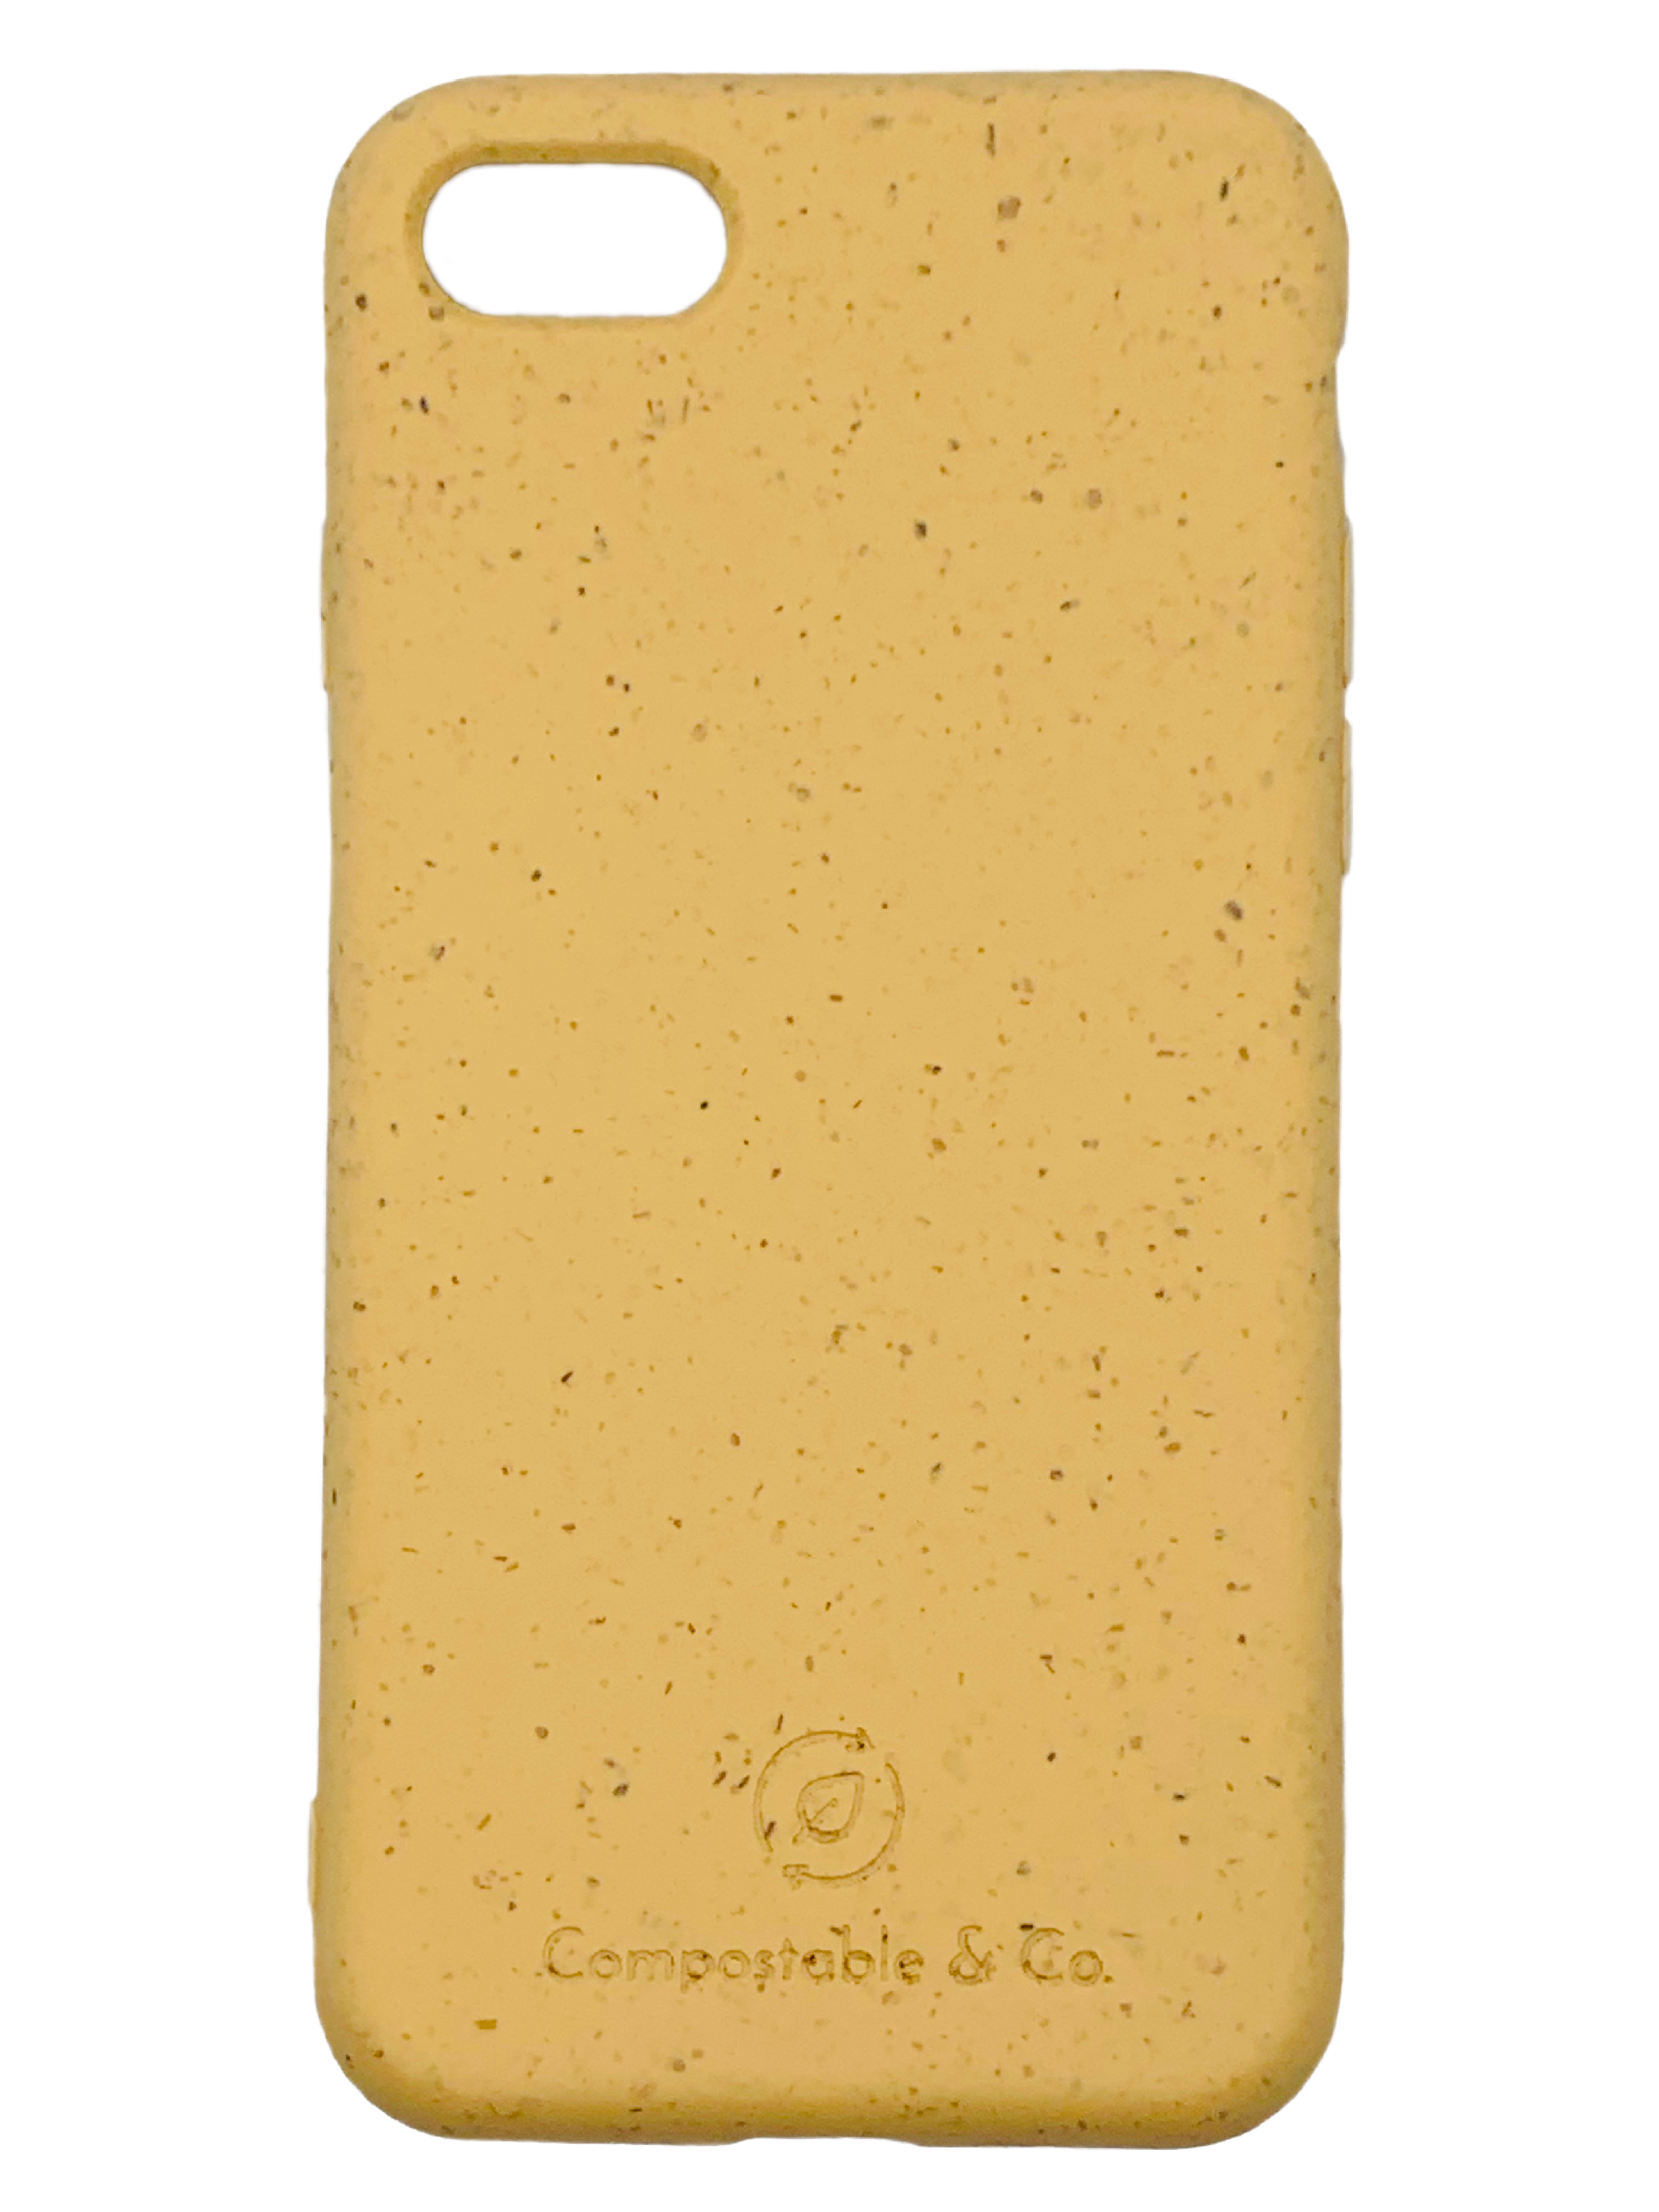 Compostable & Co. iPhone 7 / 8 / SE 2020 yellow biodegradable phone case